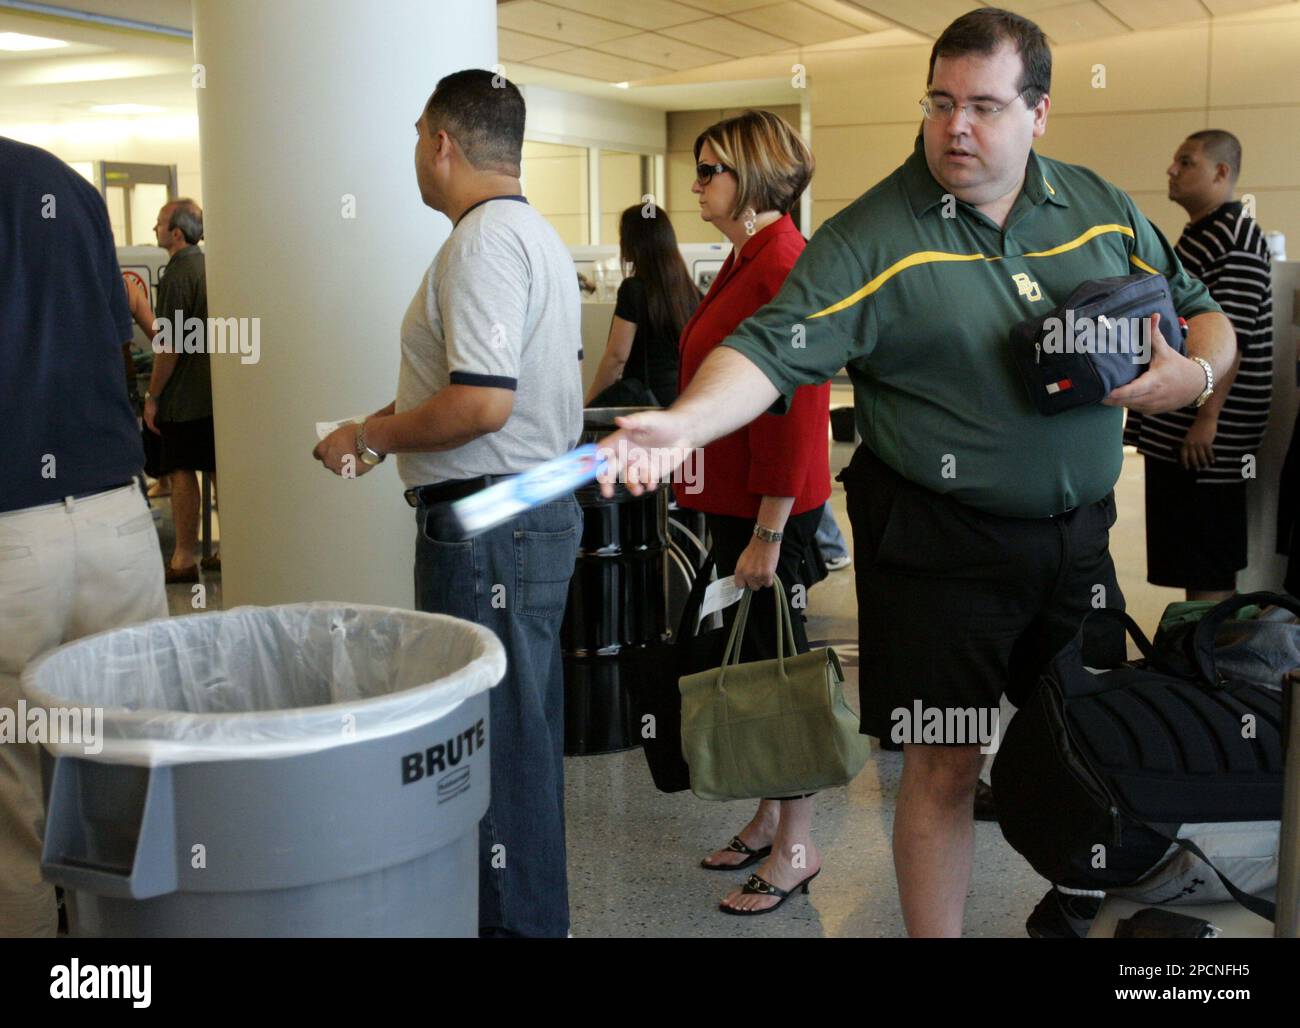 Greg Schiller throws away toothpaste from a carry-on bag as he prepares to  travel from the Dallas-Fort Worth Airport in Grapevine, Texas, Thursday,  Aug. 10, 2006. In response to a thwarted terror